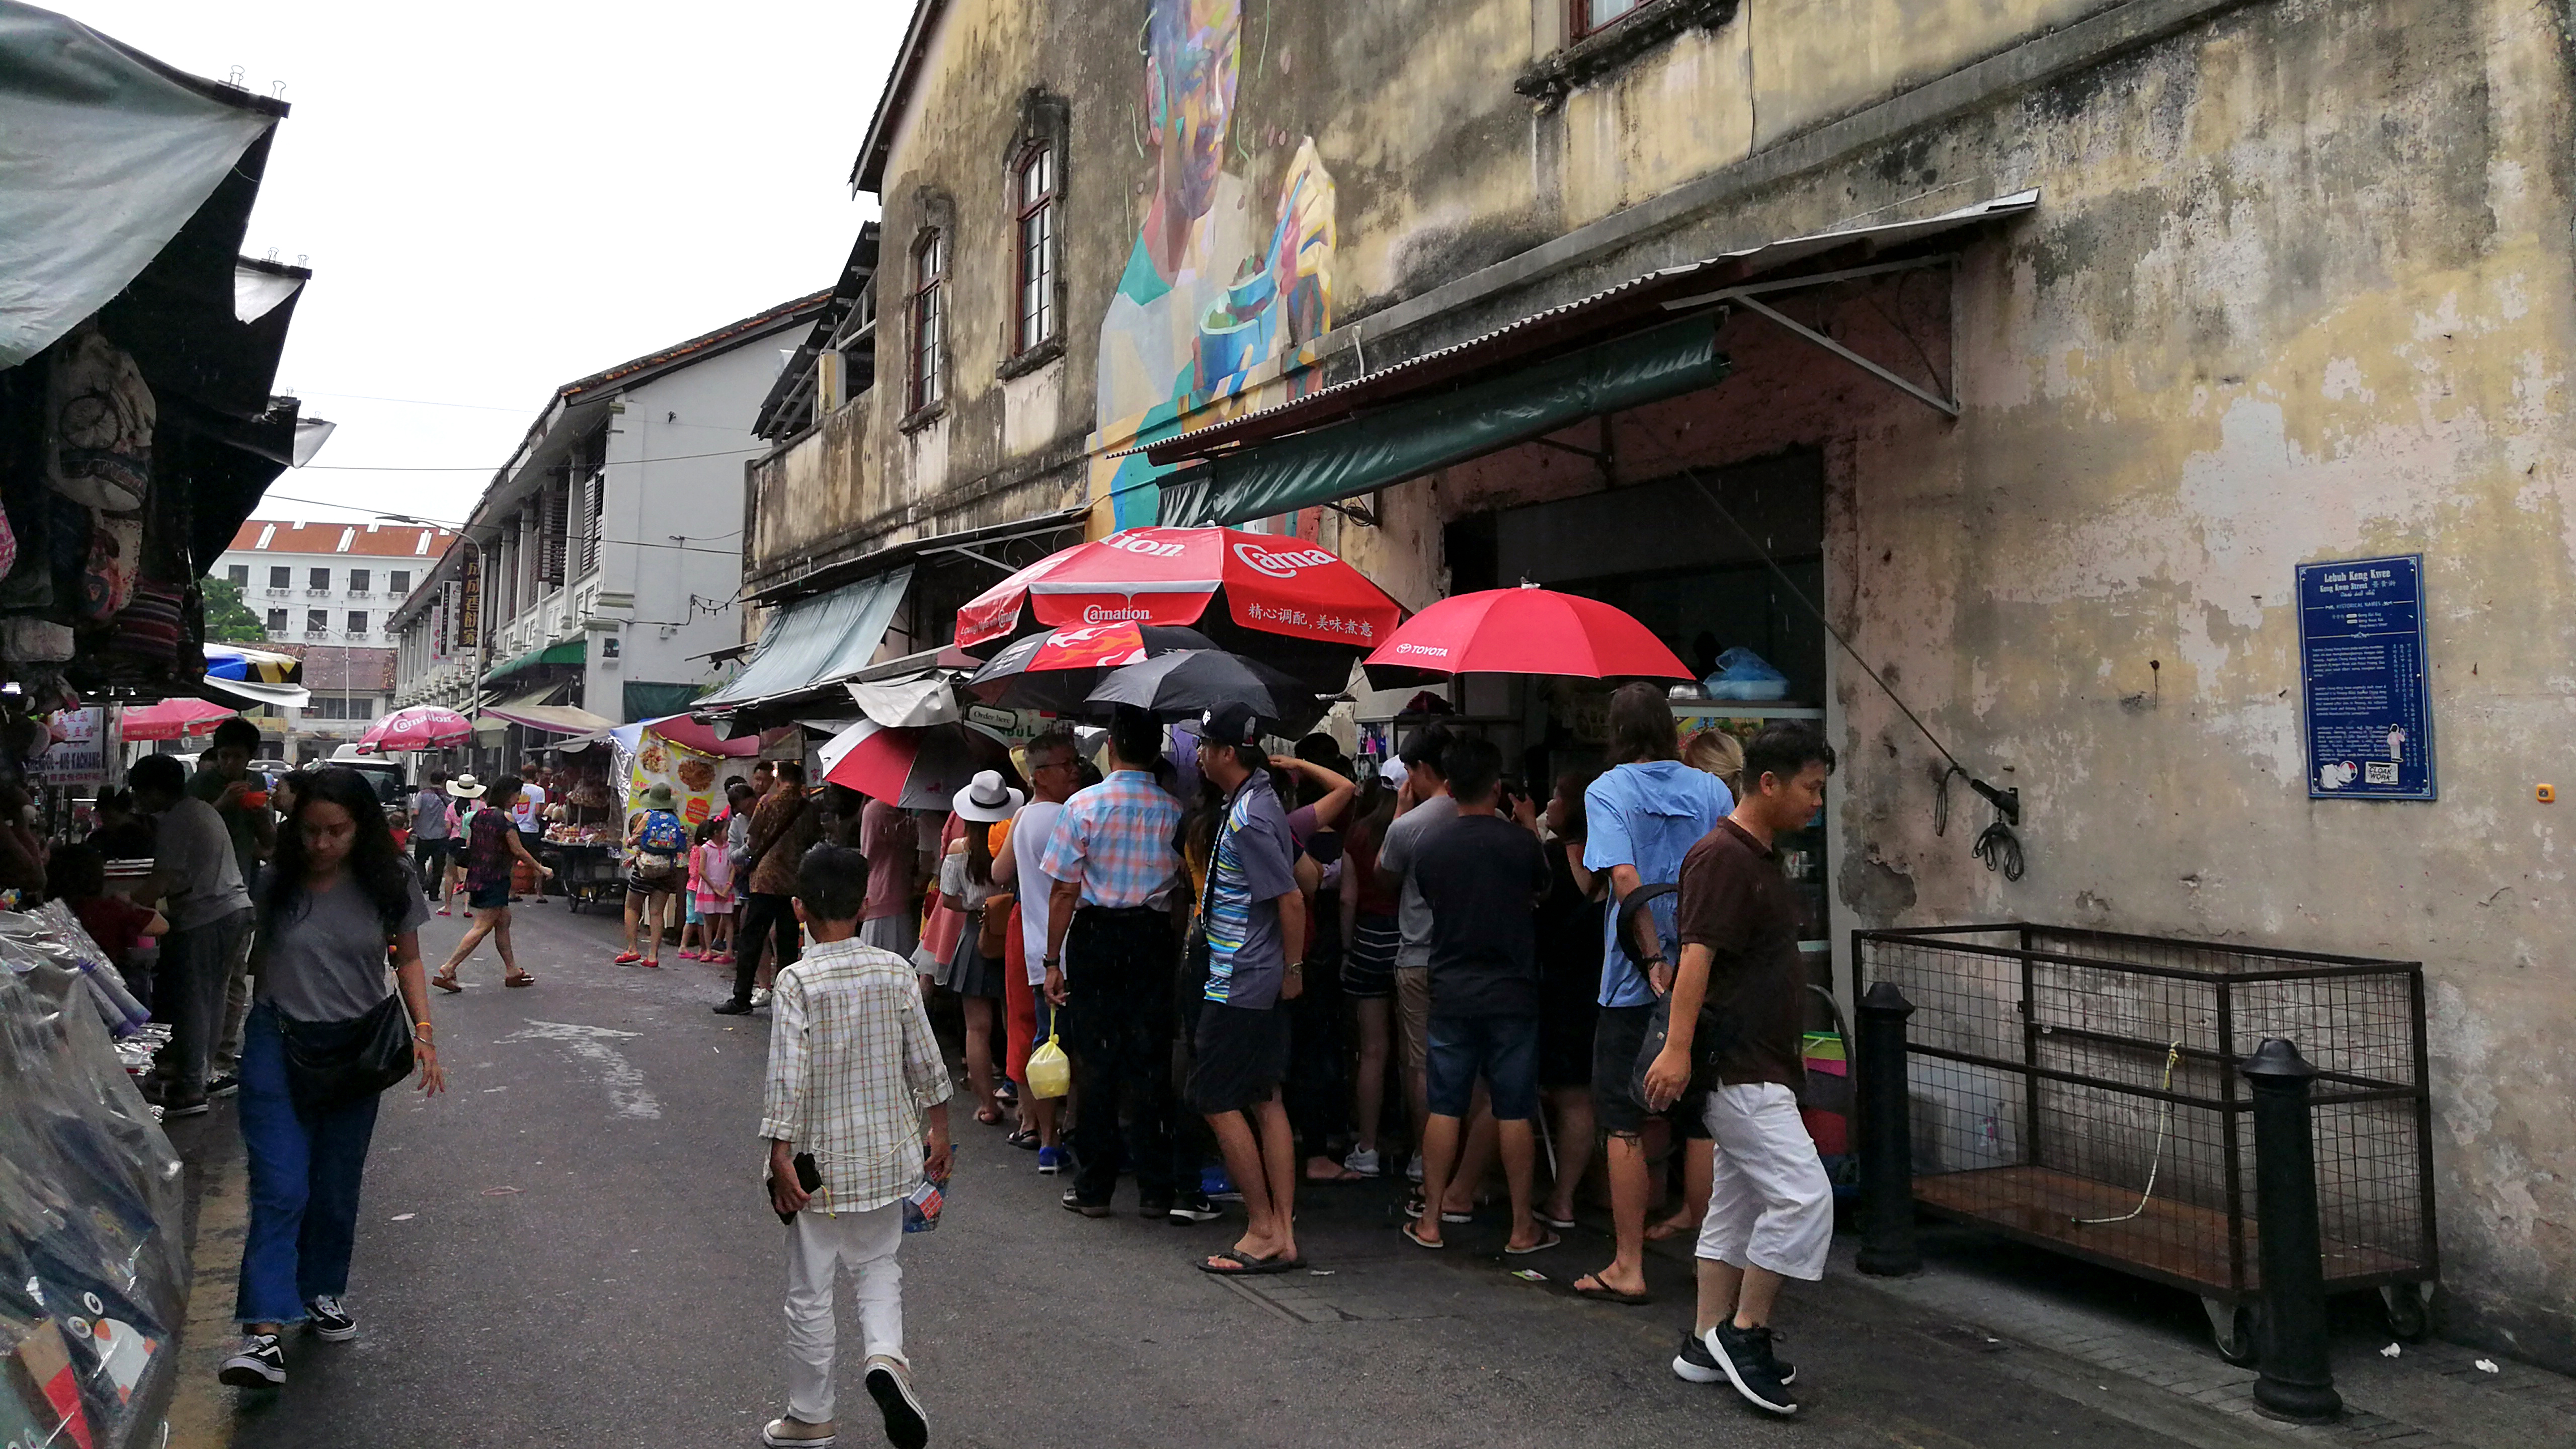 The queue for chendol (a iced dessert of coconut milk and palm sugar) at Joo Hooi Cafe, one of the most popular kopitiams (coffeeshops) for Chinese street food classics like laksa, chendol, char kway teow and lobak. Photo by Alexandra Wong